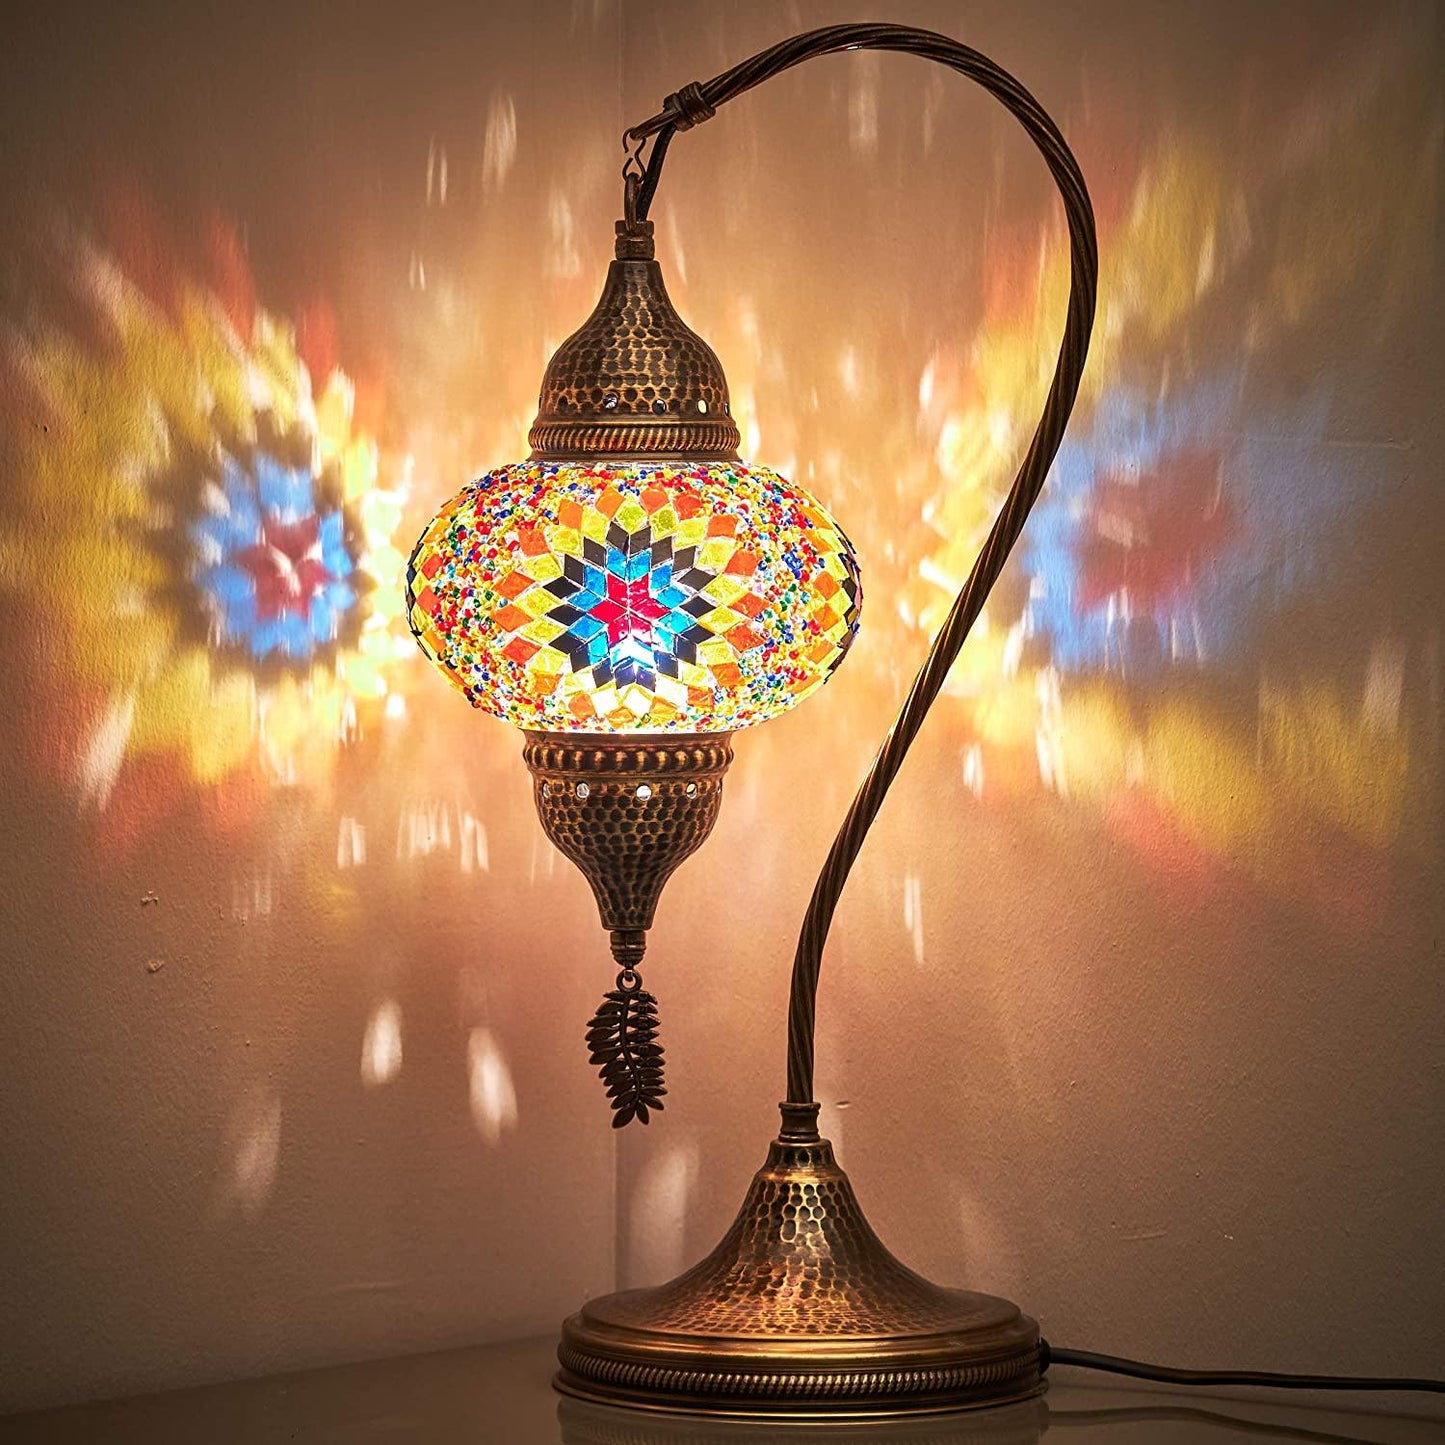 HANDMADE MOSAIC NEW SWAN NECK LAMP (FREE AND FAST EXPEDITED 5 DAY SHIPPING)